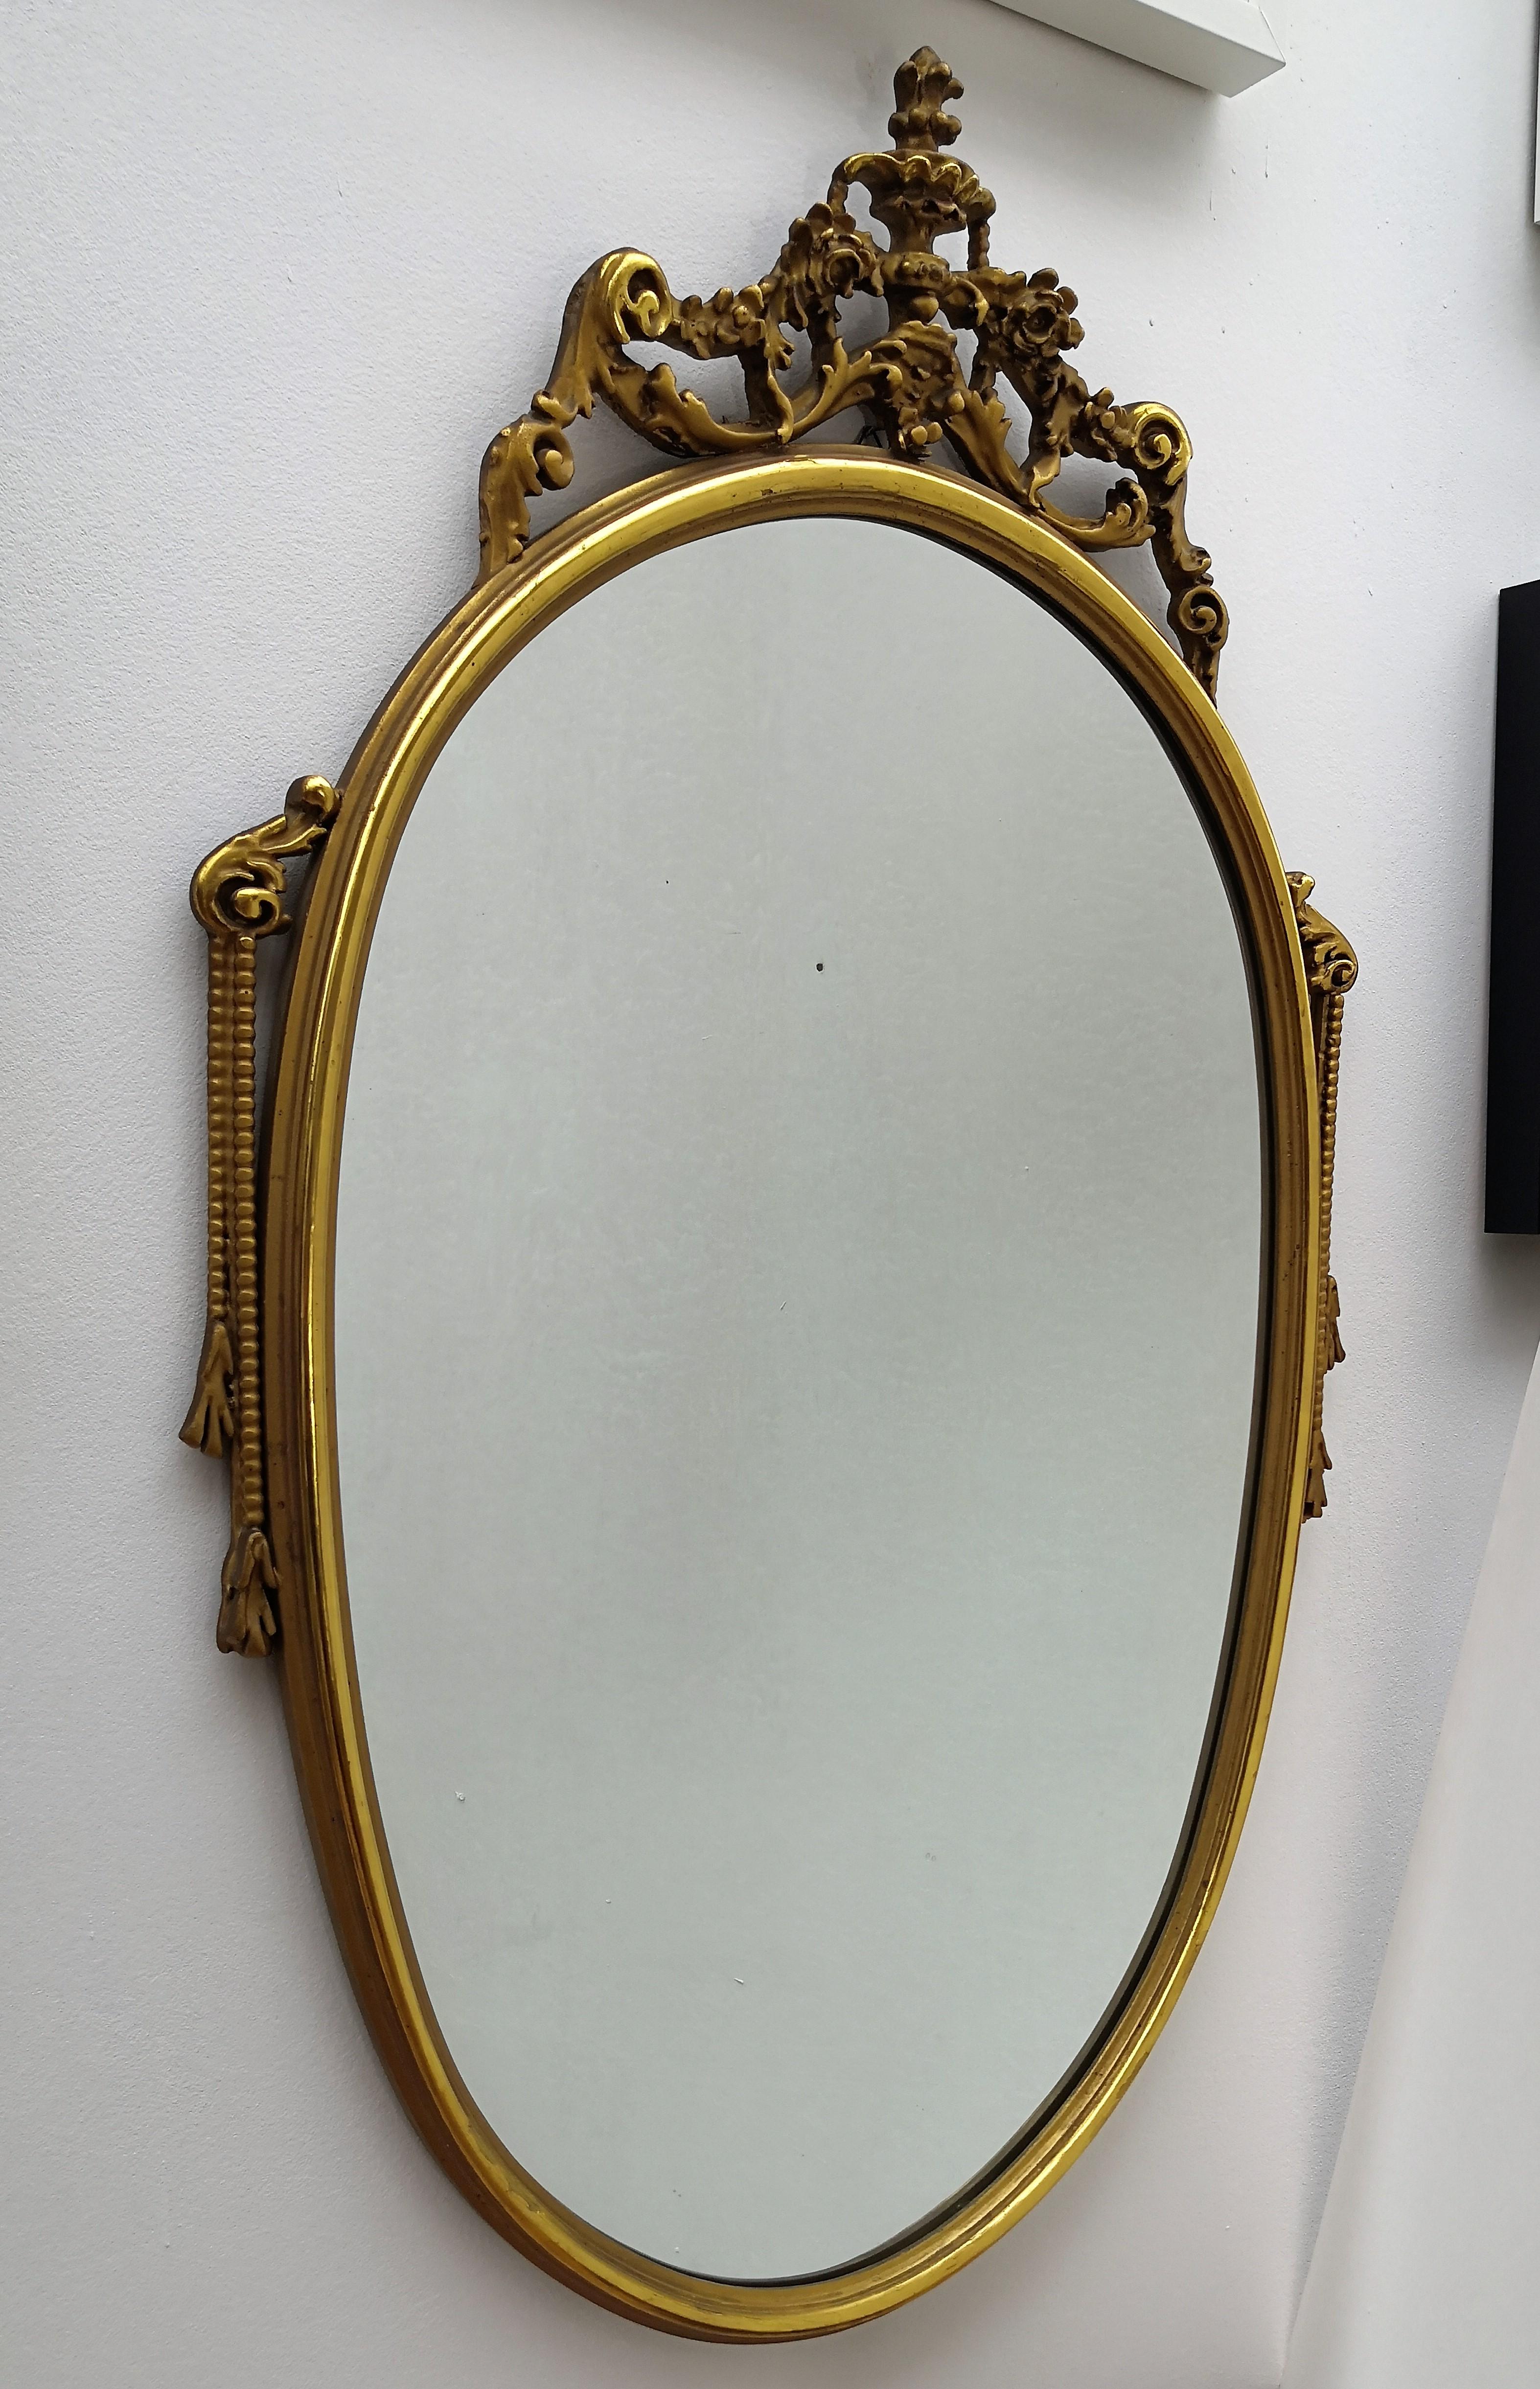 1960s Italian Ornate Carved Giltwood Oval Wall Mirror 3